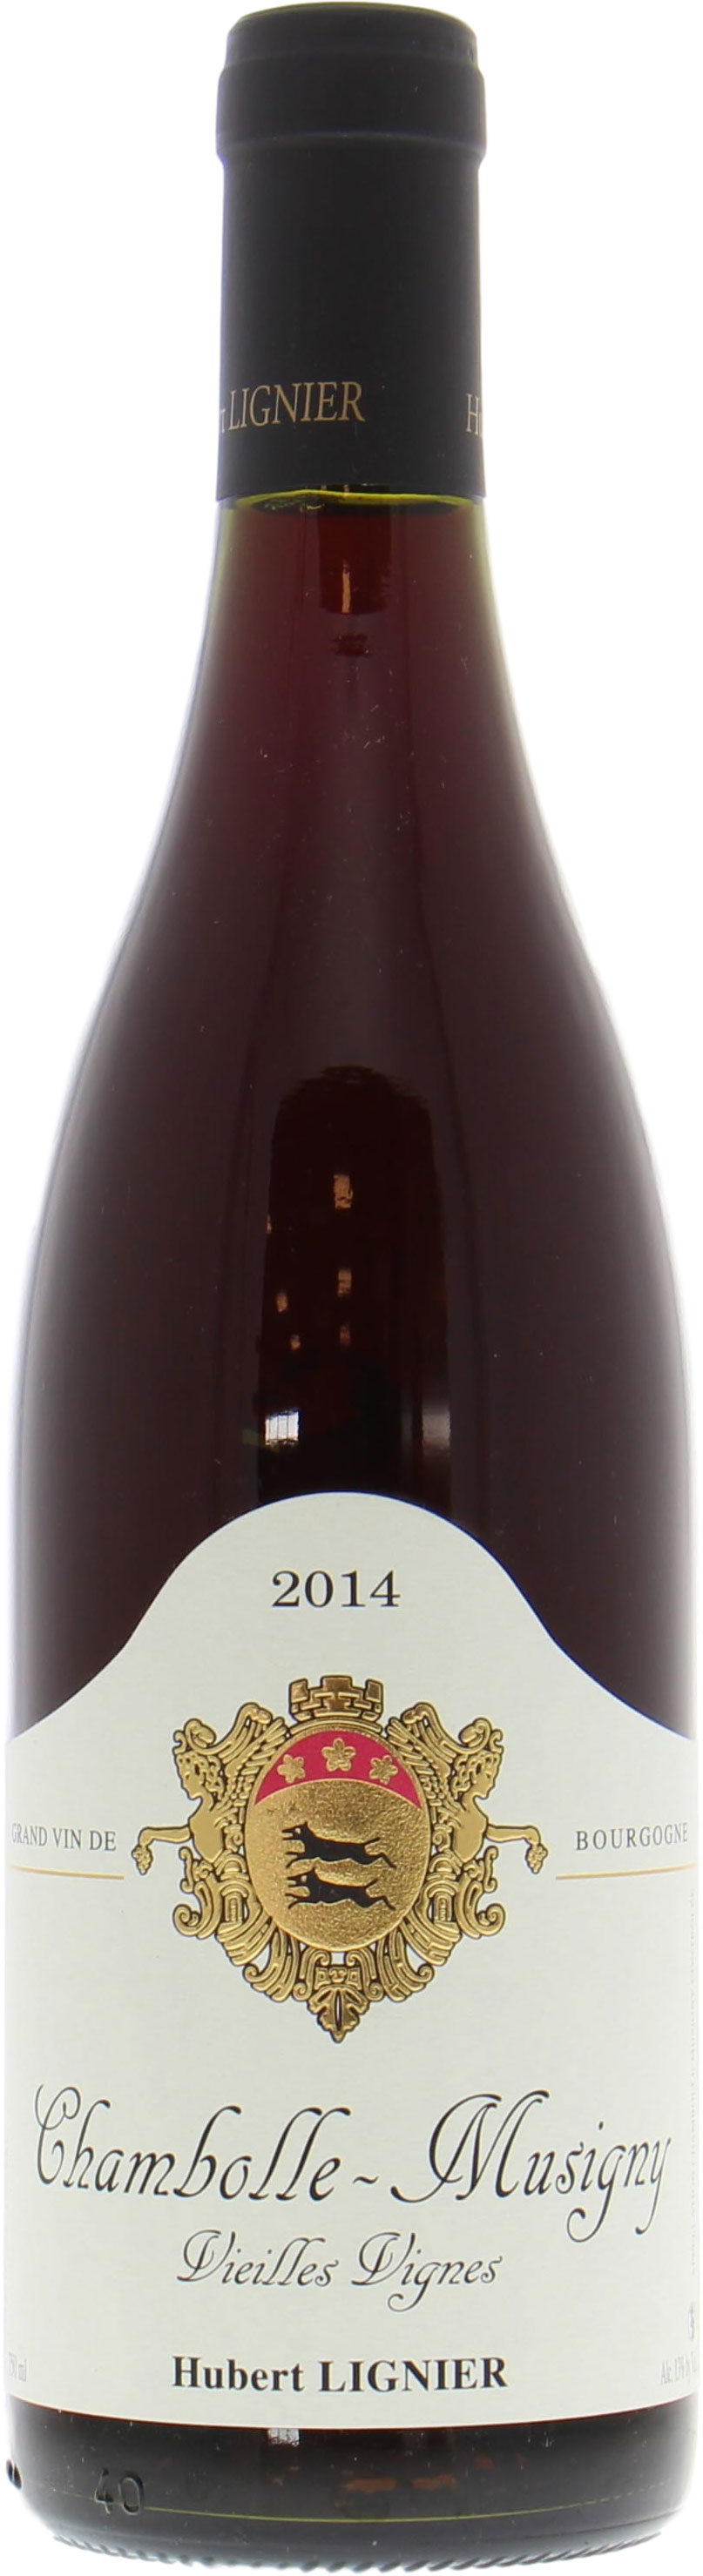 Hubert Lignier - Chambolle Musigny Vieilles Vignes 2014 Perfect